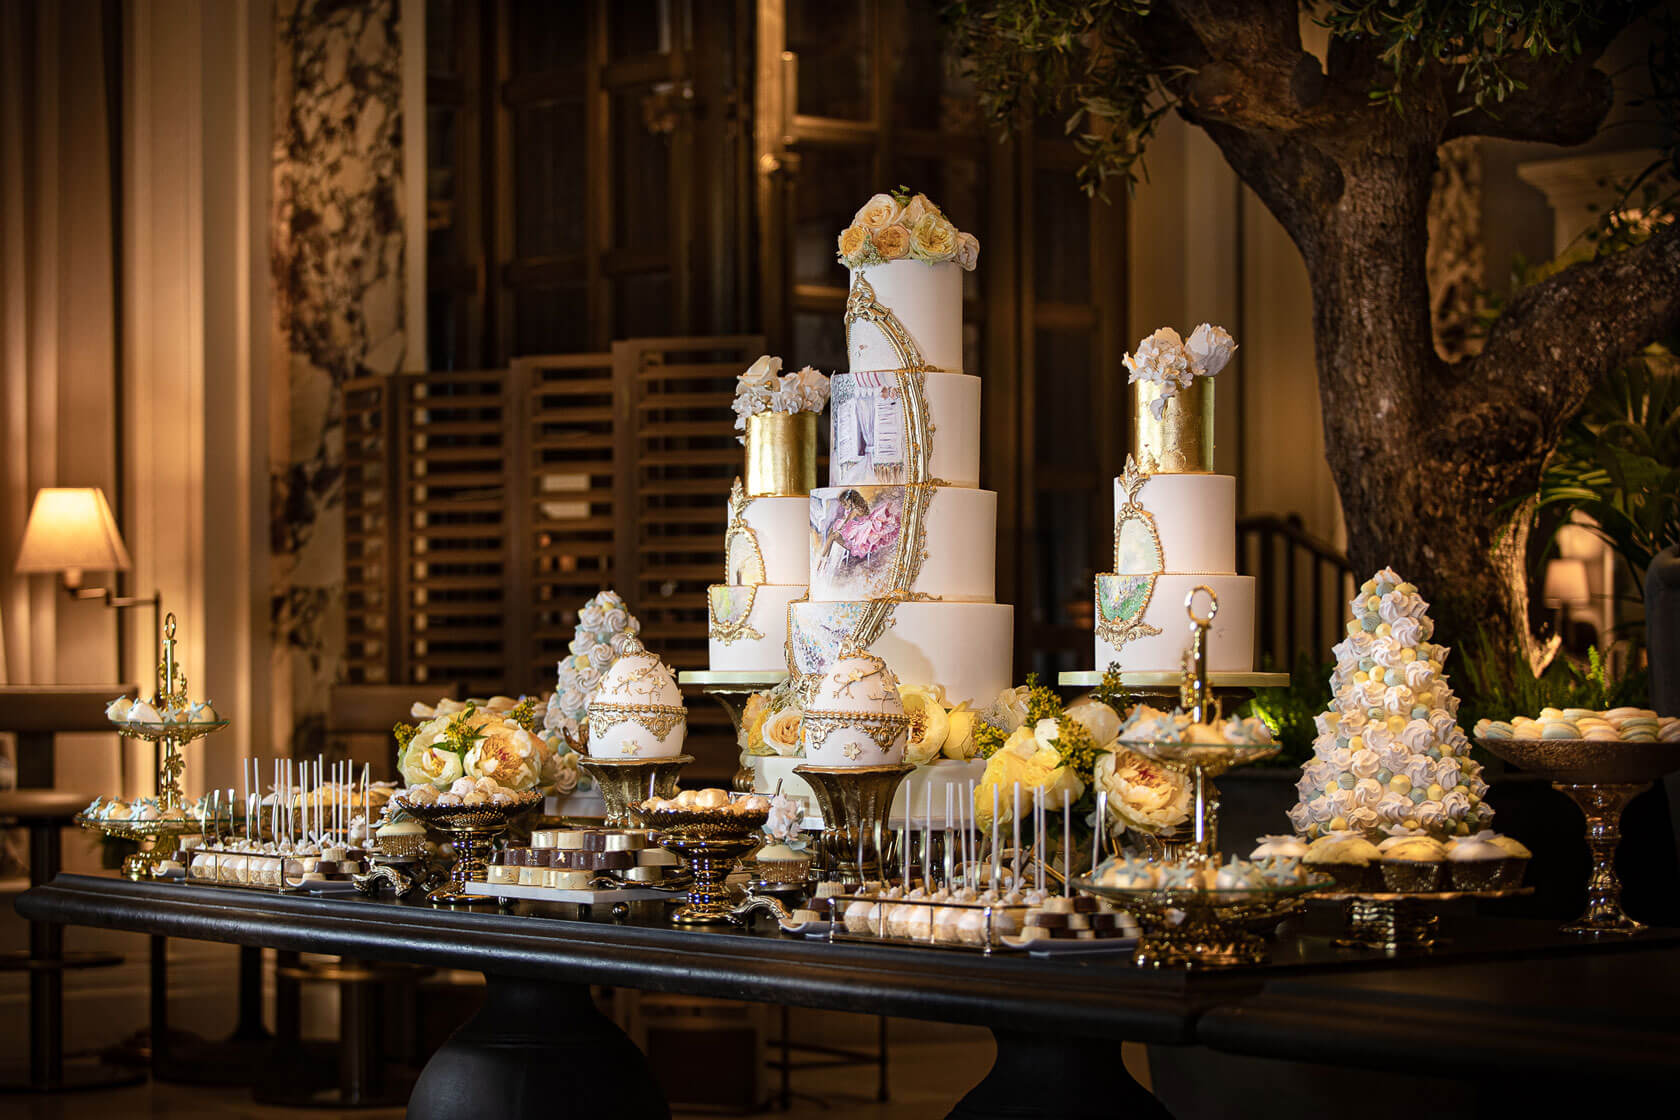 a bespoke display of indulgent sweets and deserts on a table for an event at the kimpton fitzroy hotel